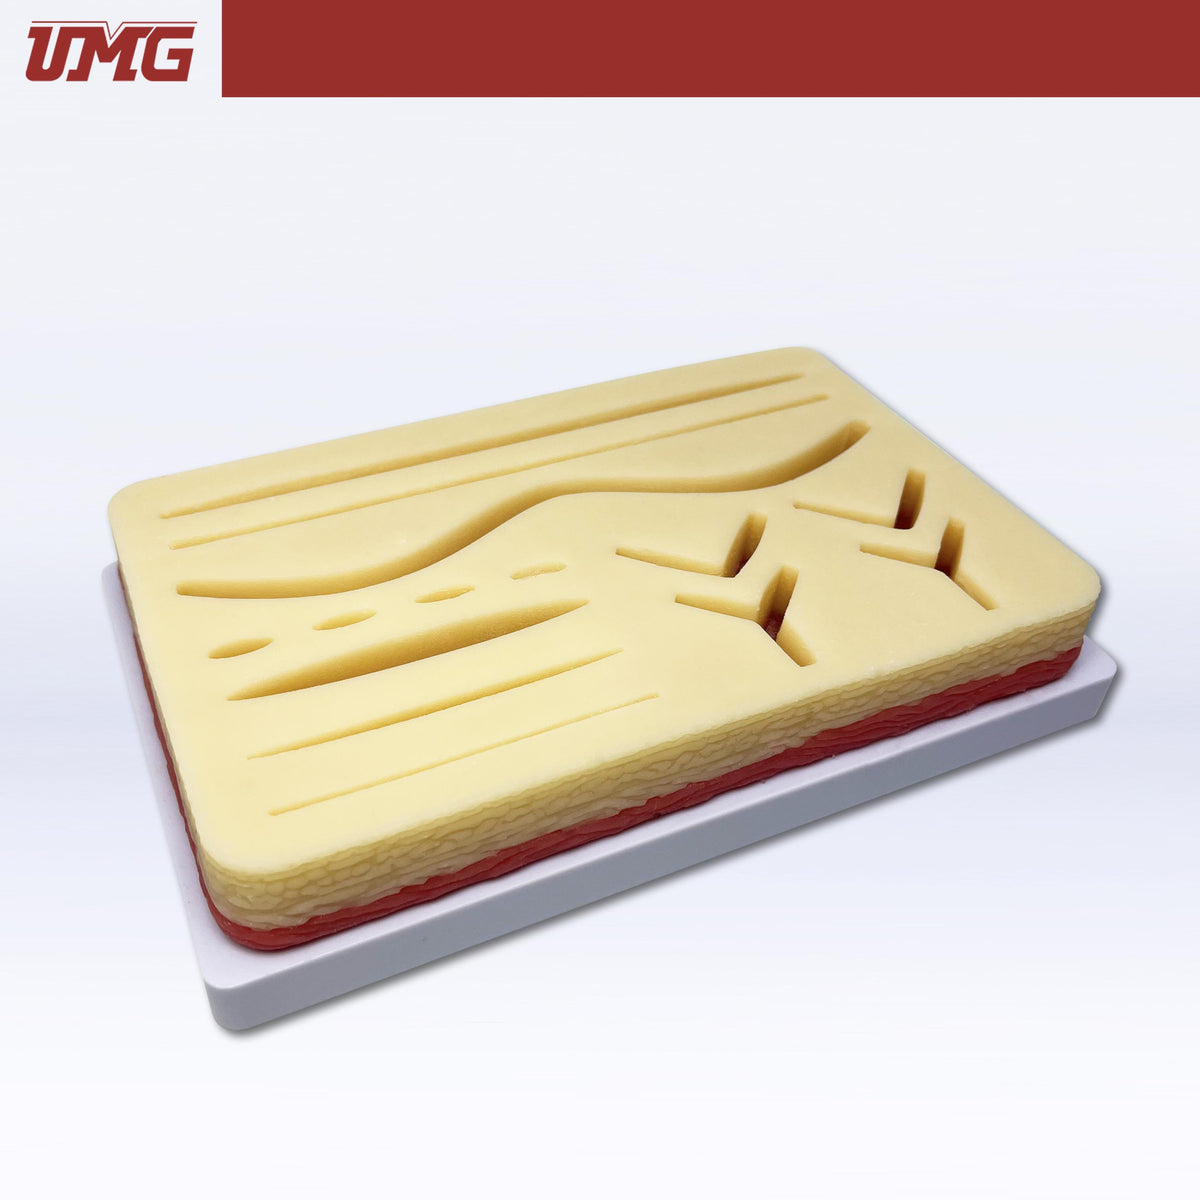 DentrealStore - Umg Dental Dental Suture Model Practice Pad Only Silicon - Table Type